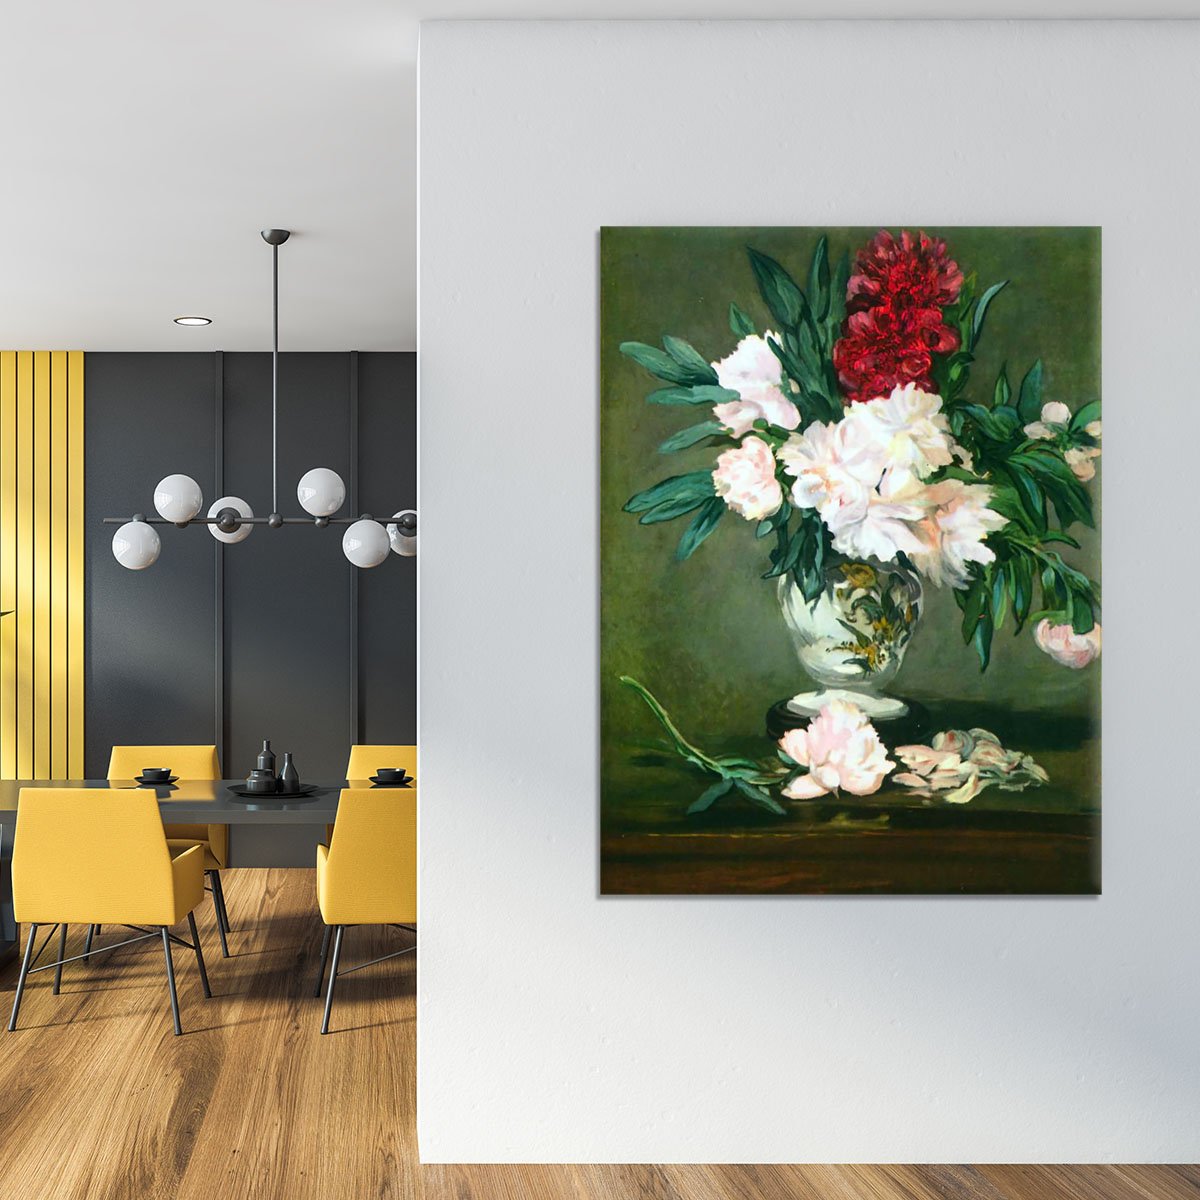 Still Life Vase with Peonies by Manet Canvas Print or Poster